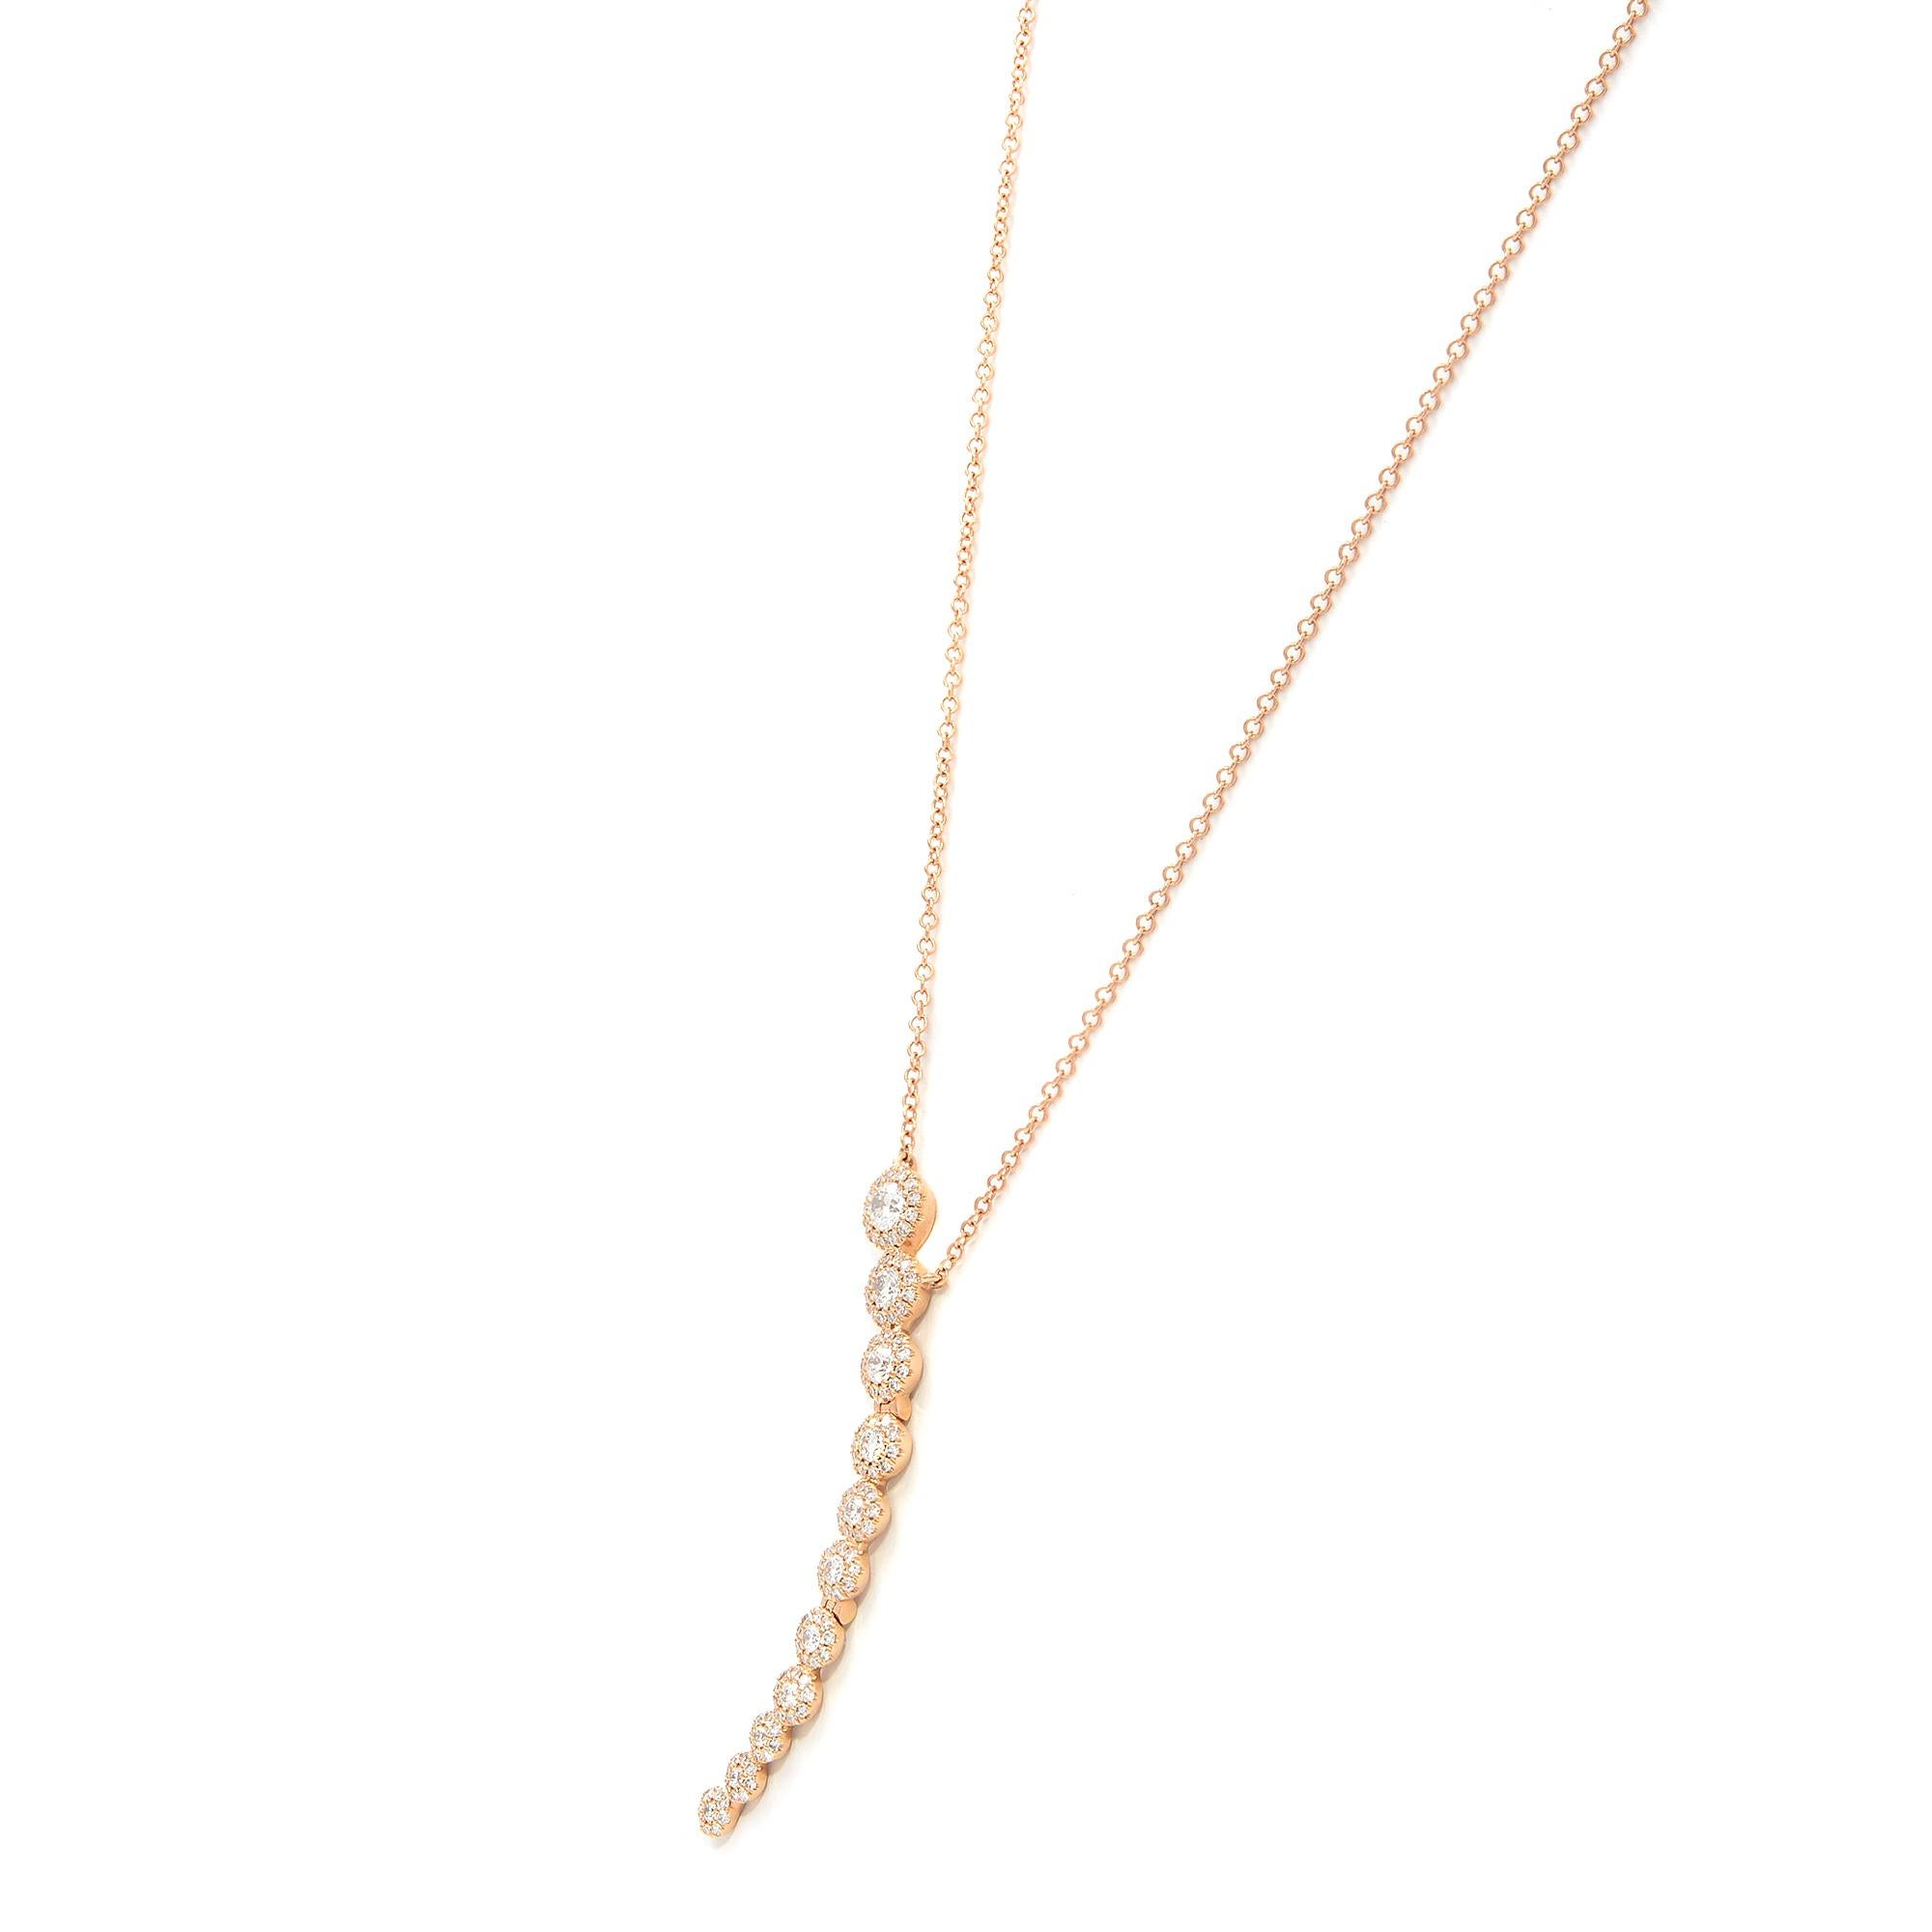 This beautiful and delicate diamond pendant will leave everyone speechless the moment they see it. Crafted in high polished solid 14k rose gold this necklace is set with brilliant round cut diamonds of G-H color and clean VS clarity. Total Carat